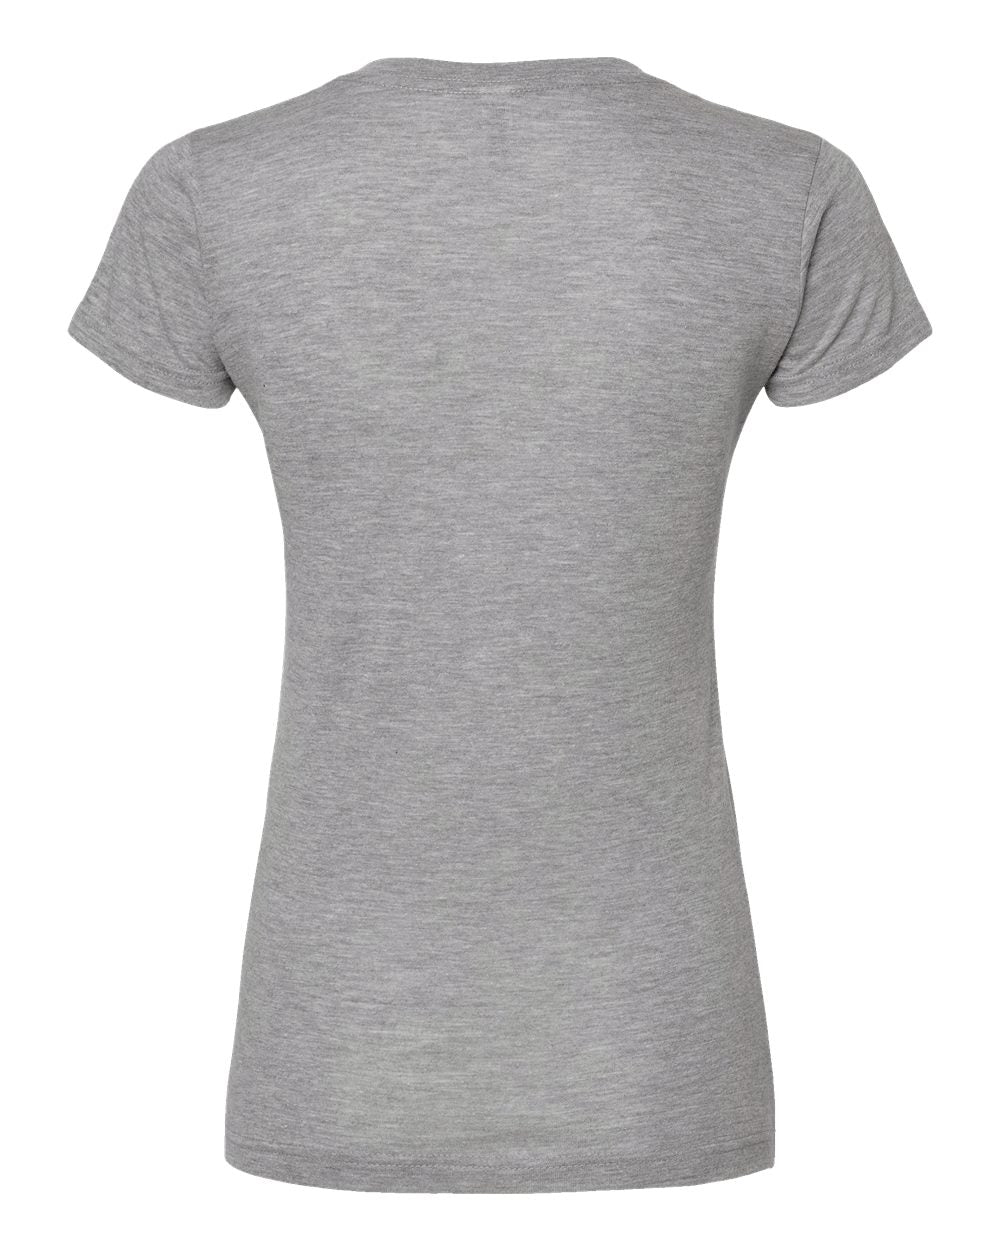 M&O Women's Deluxe Blend V-Neck T-Shirt 3542 #color_Heather Grey